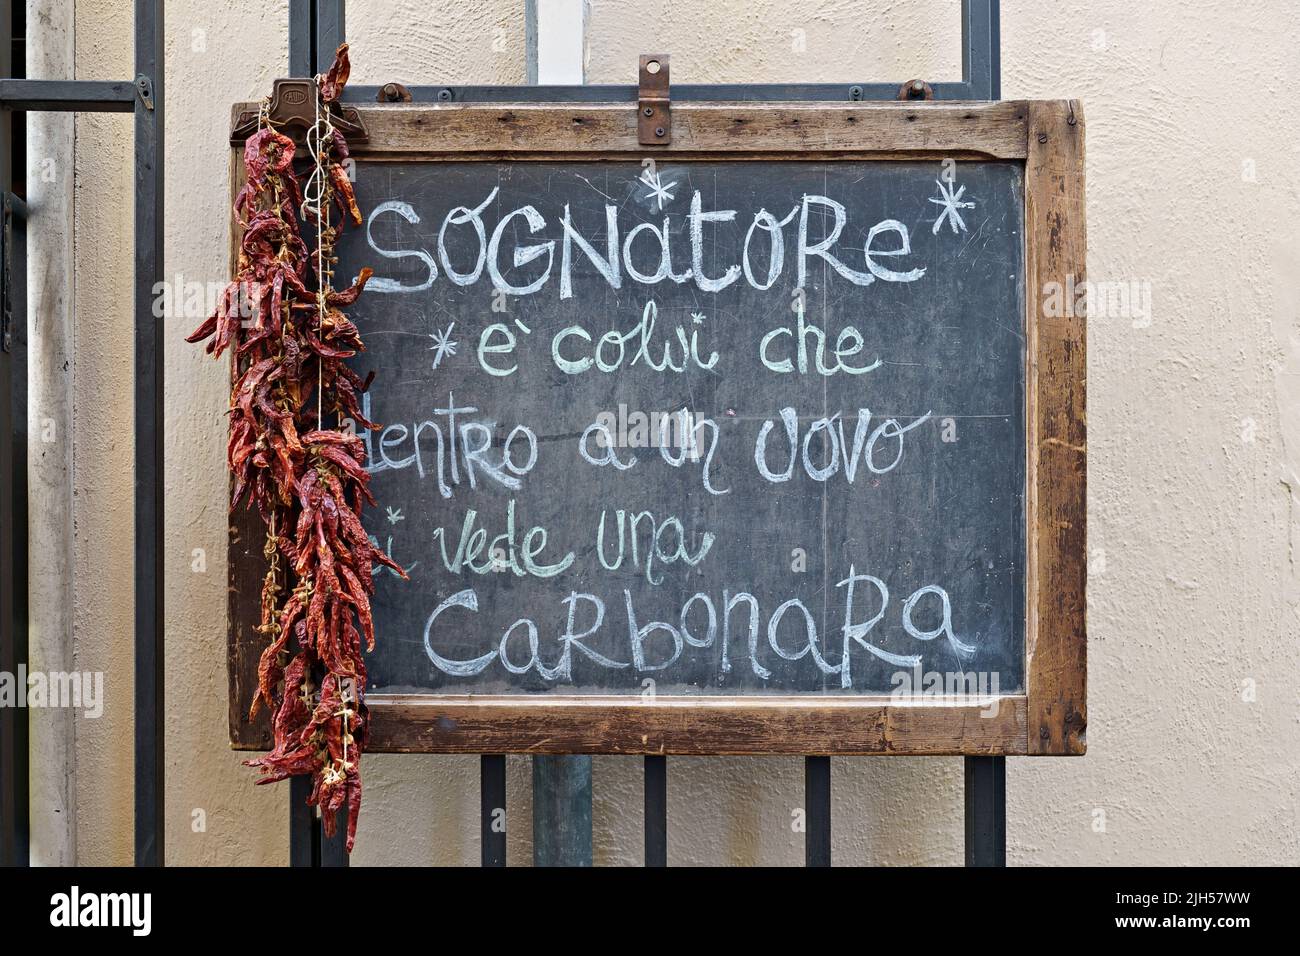 A dreamer is the one who sees a carbonara inside an egg, written on a black chalkboard sign outside a restaurant. Rome, Italy, Europe, European Union Stock Photo